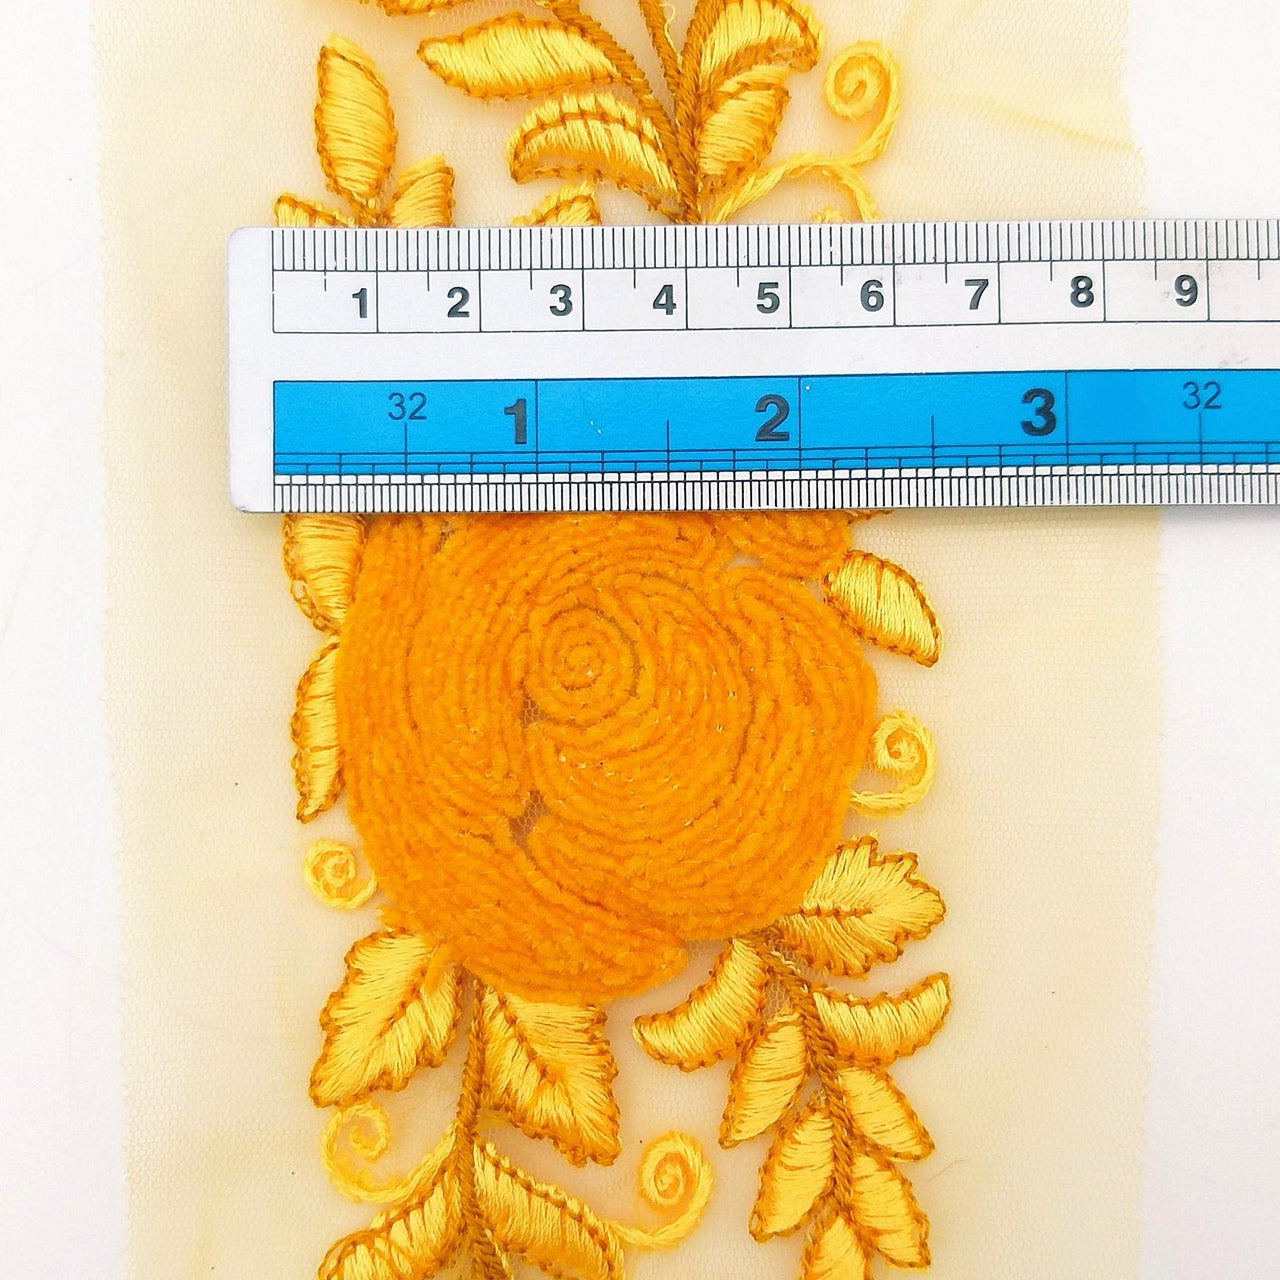 Orange Yellow Soft Net Fabric Lace Trim with Floral Embroidery, Lace Trim, Sari Border